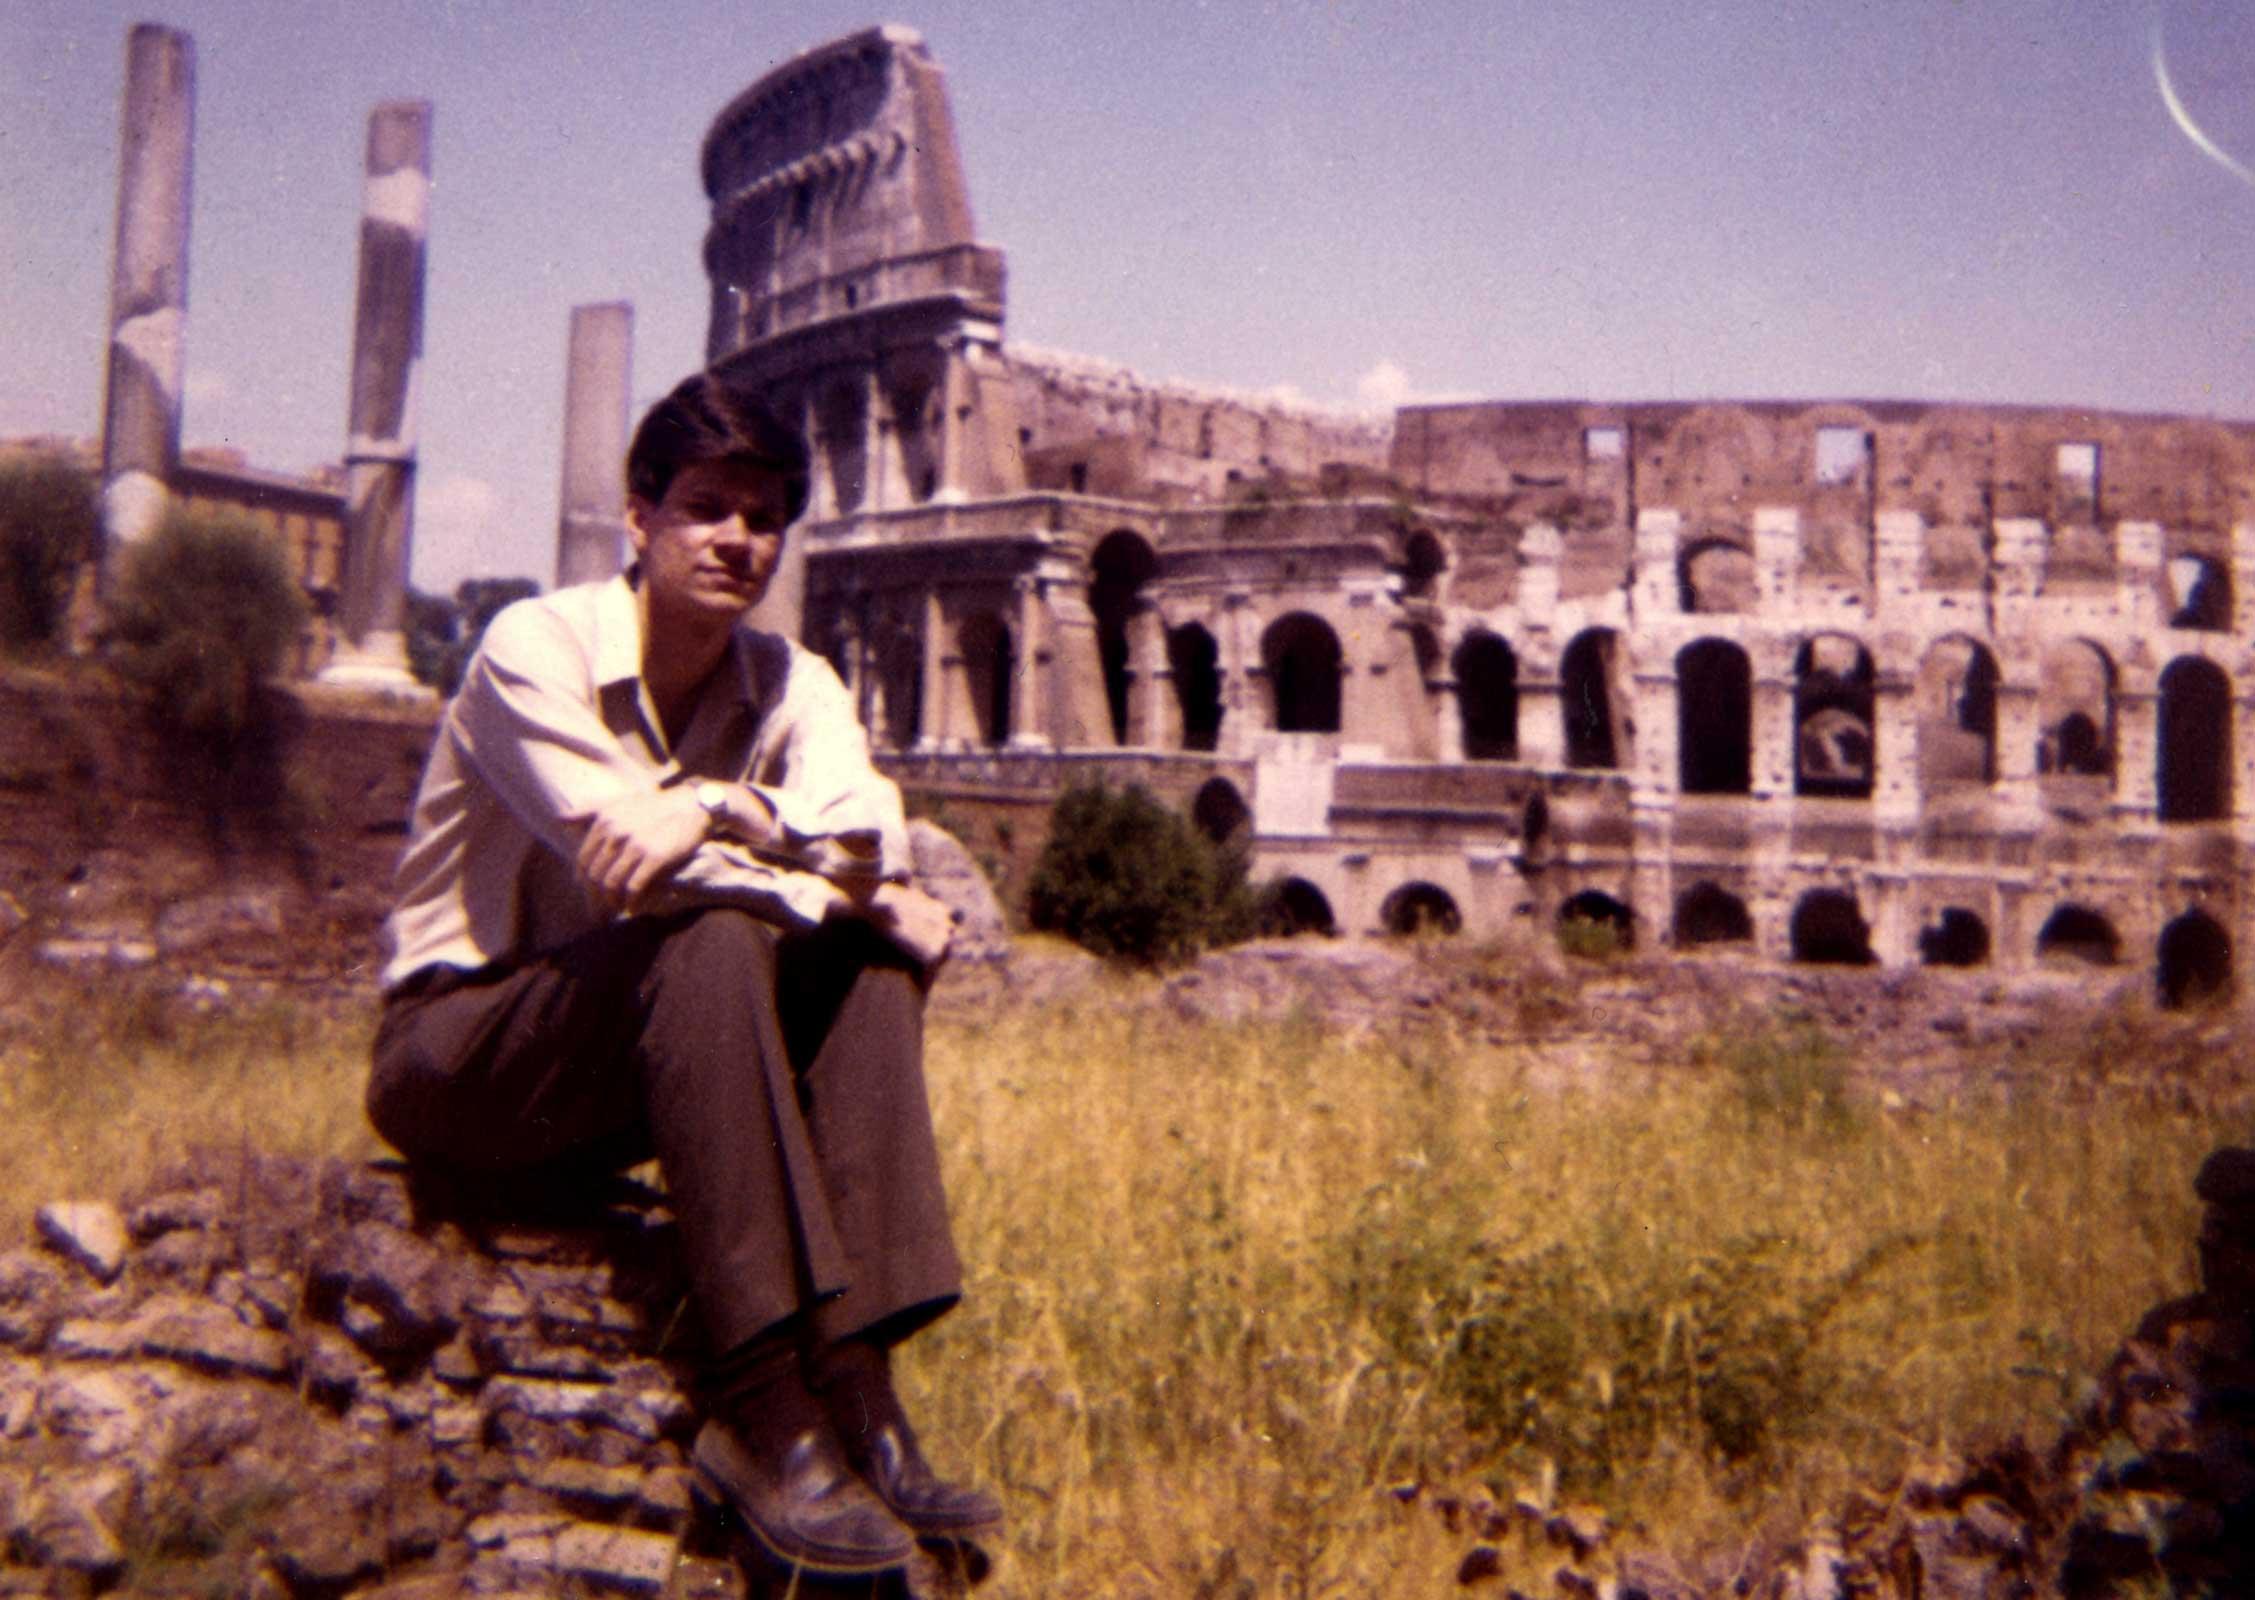 a young man seated on a rock with the Colosseum in Rome in the background